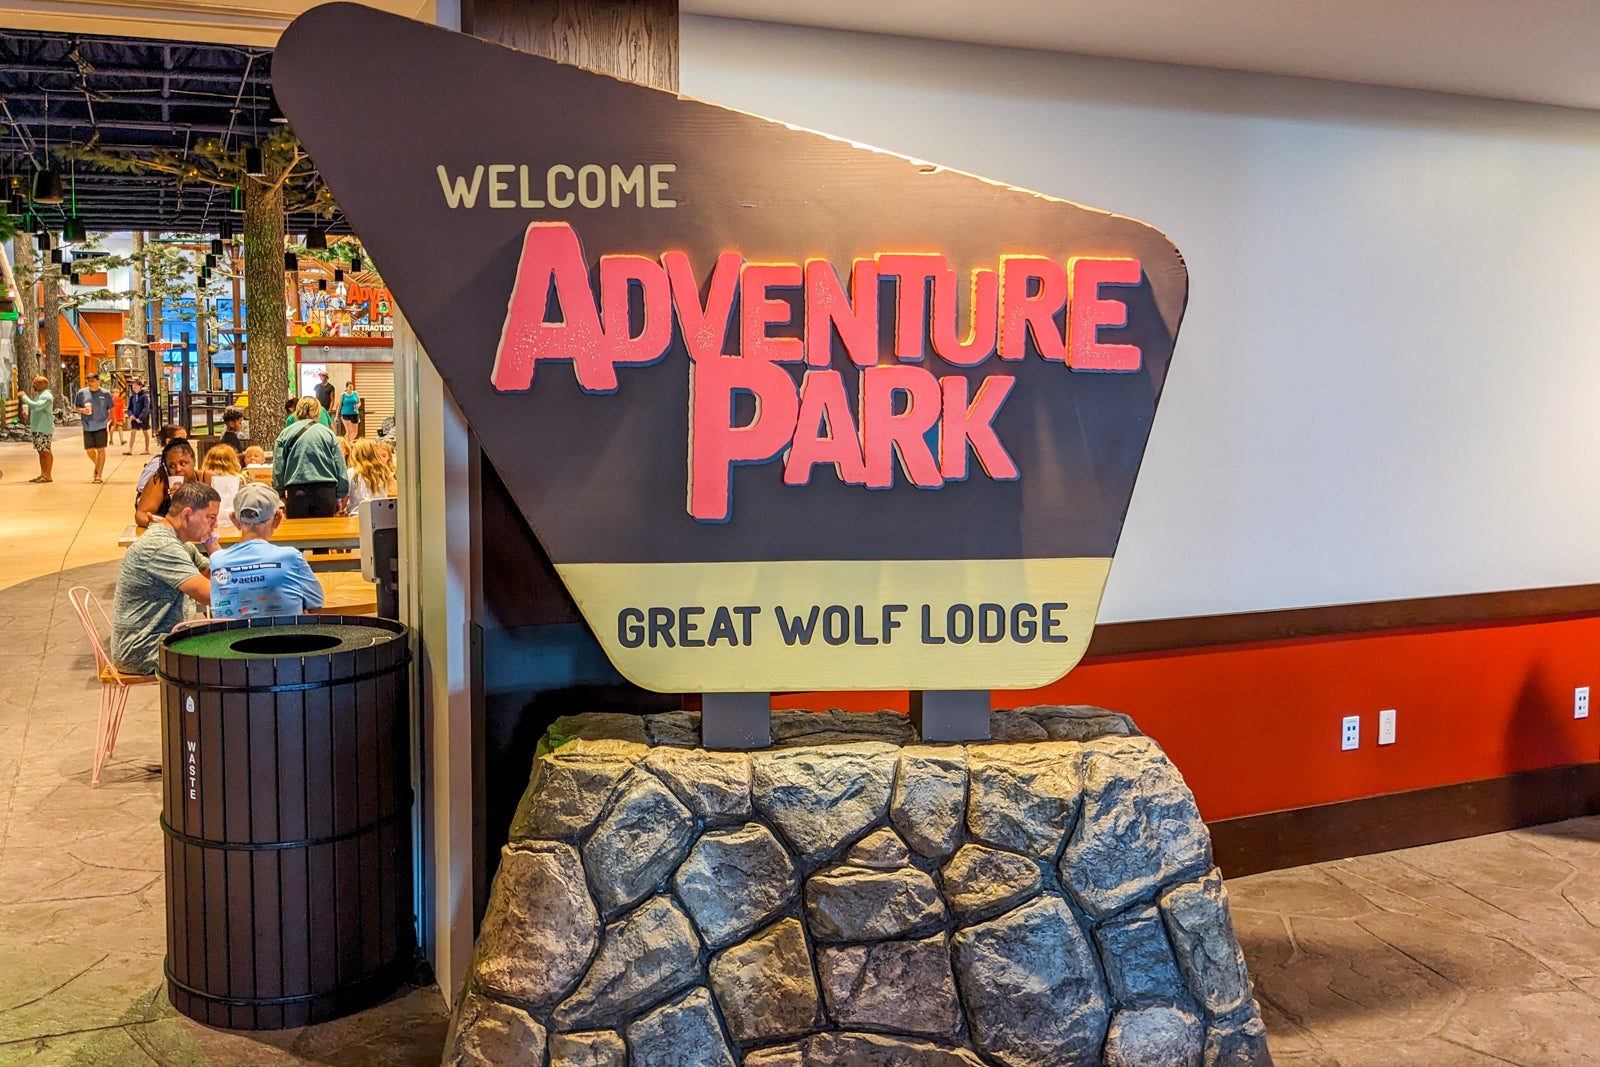 Sign for Great Wolf Lodge Maryland's adventure park